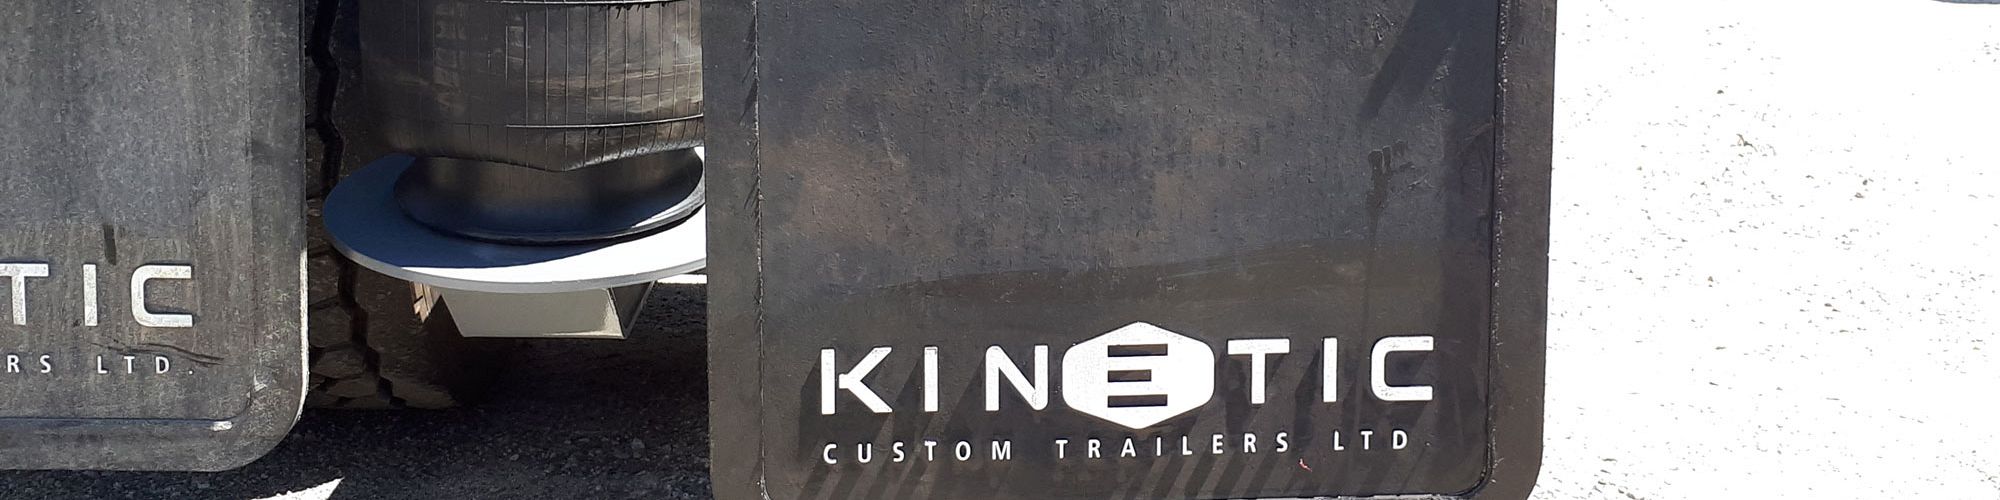 Request a Quote | Kinetic Custom Trailers